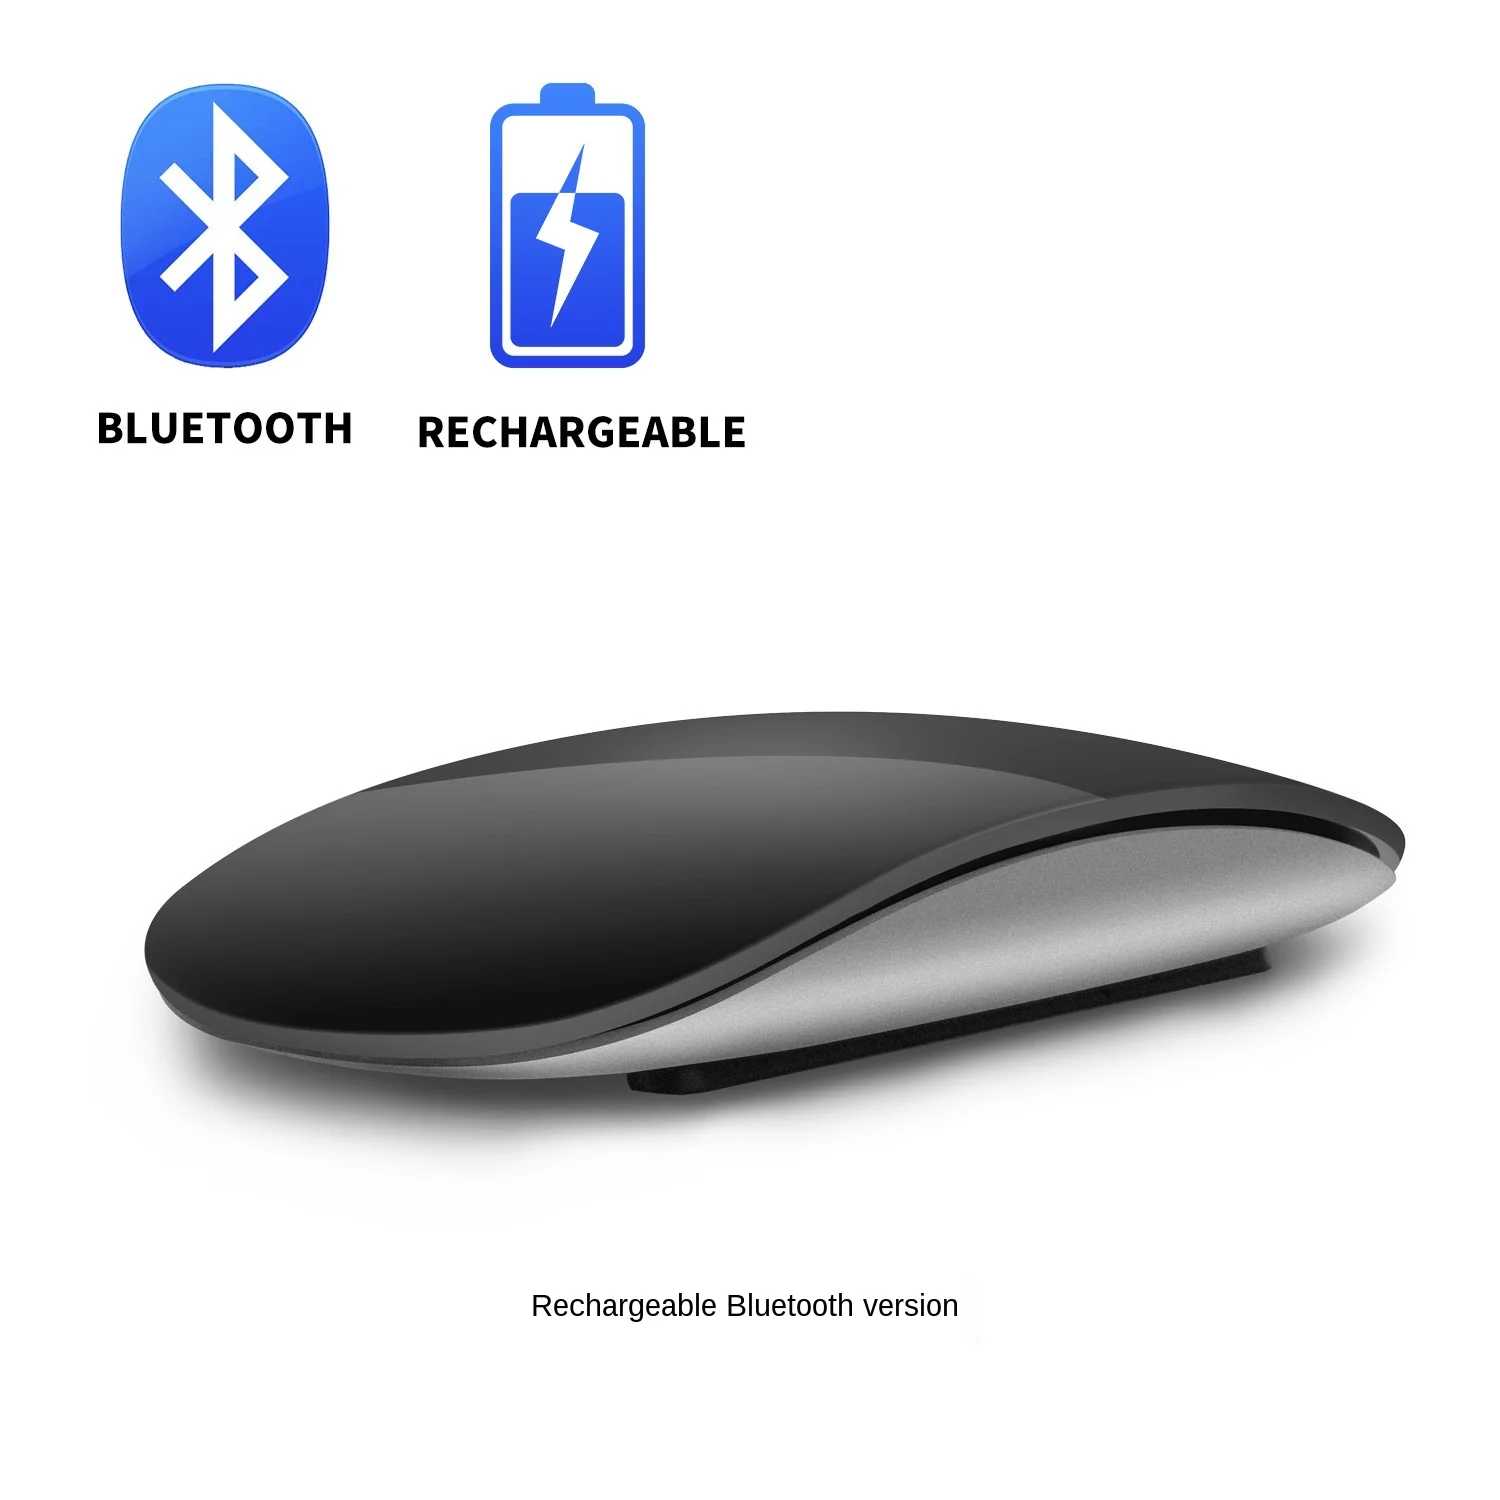 Wireless Mouse Bluetooth 5.0 Rechargeable Mouse Wireless Computer Silent Mice Ergonomic Mouse Optical Mice For Apple Mac PC iPad small computer mouse Mice